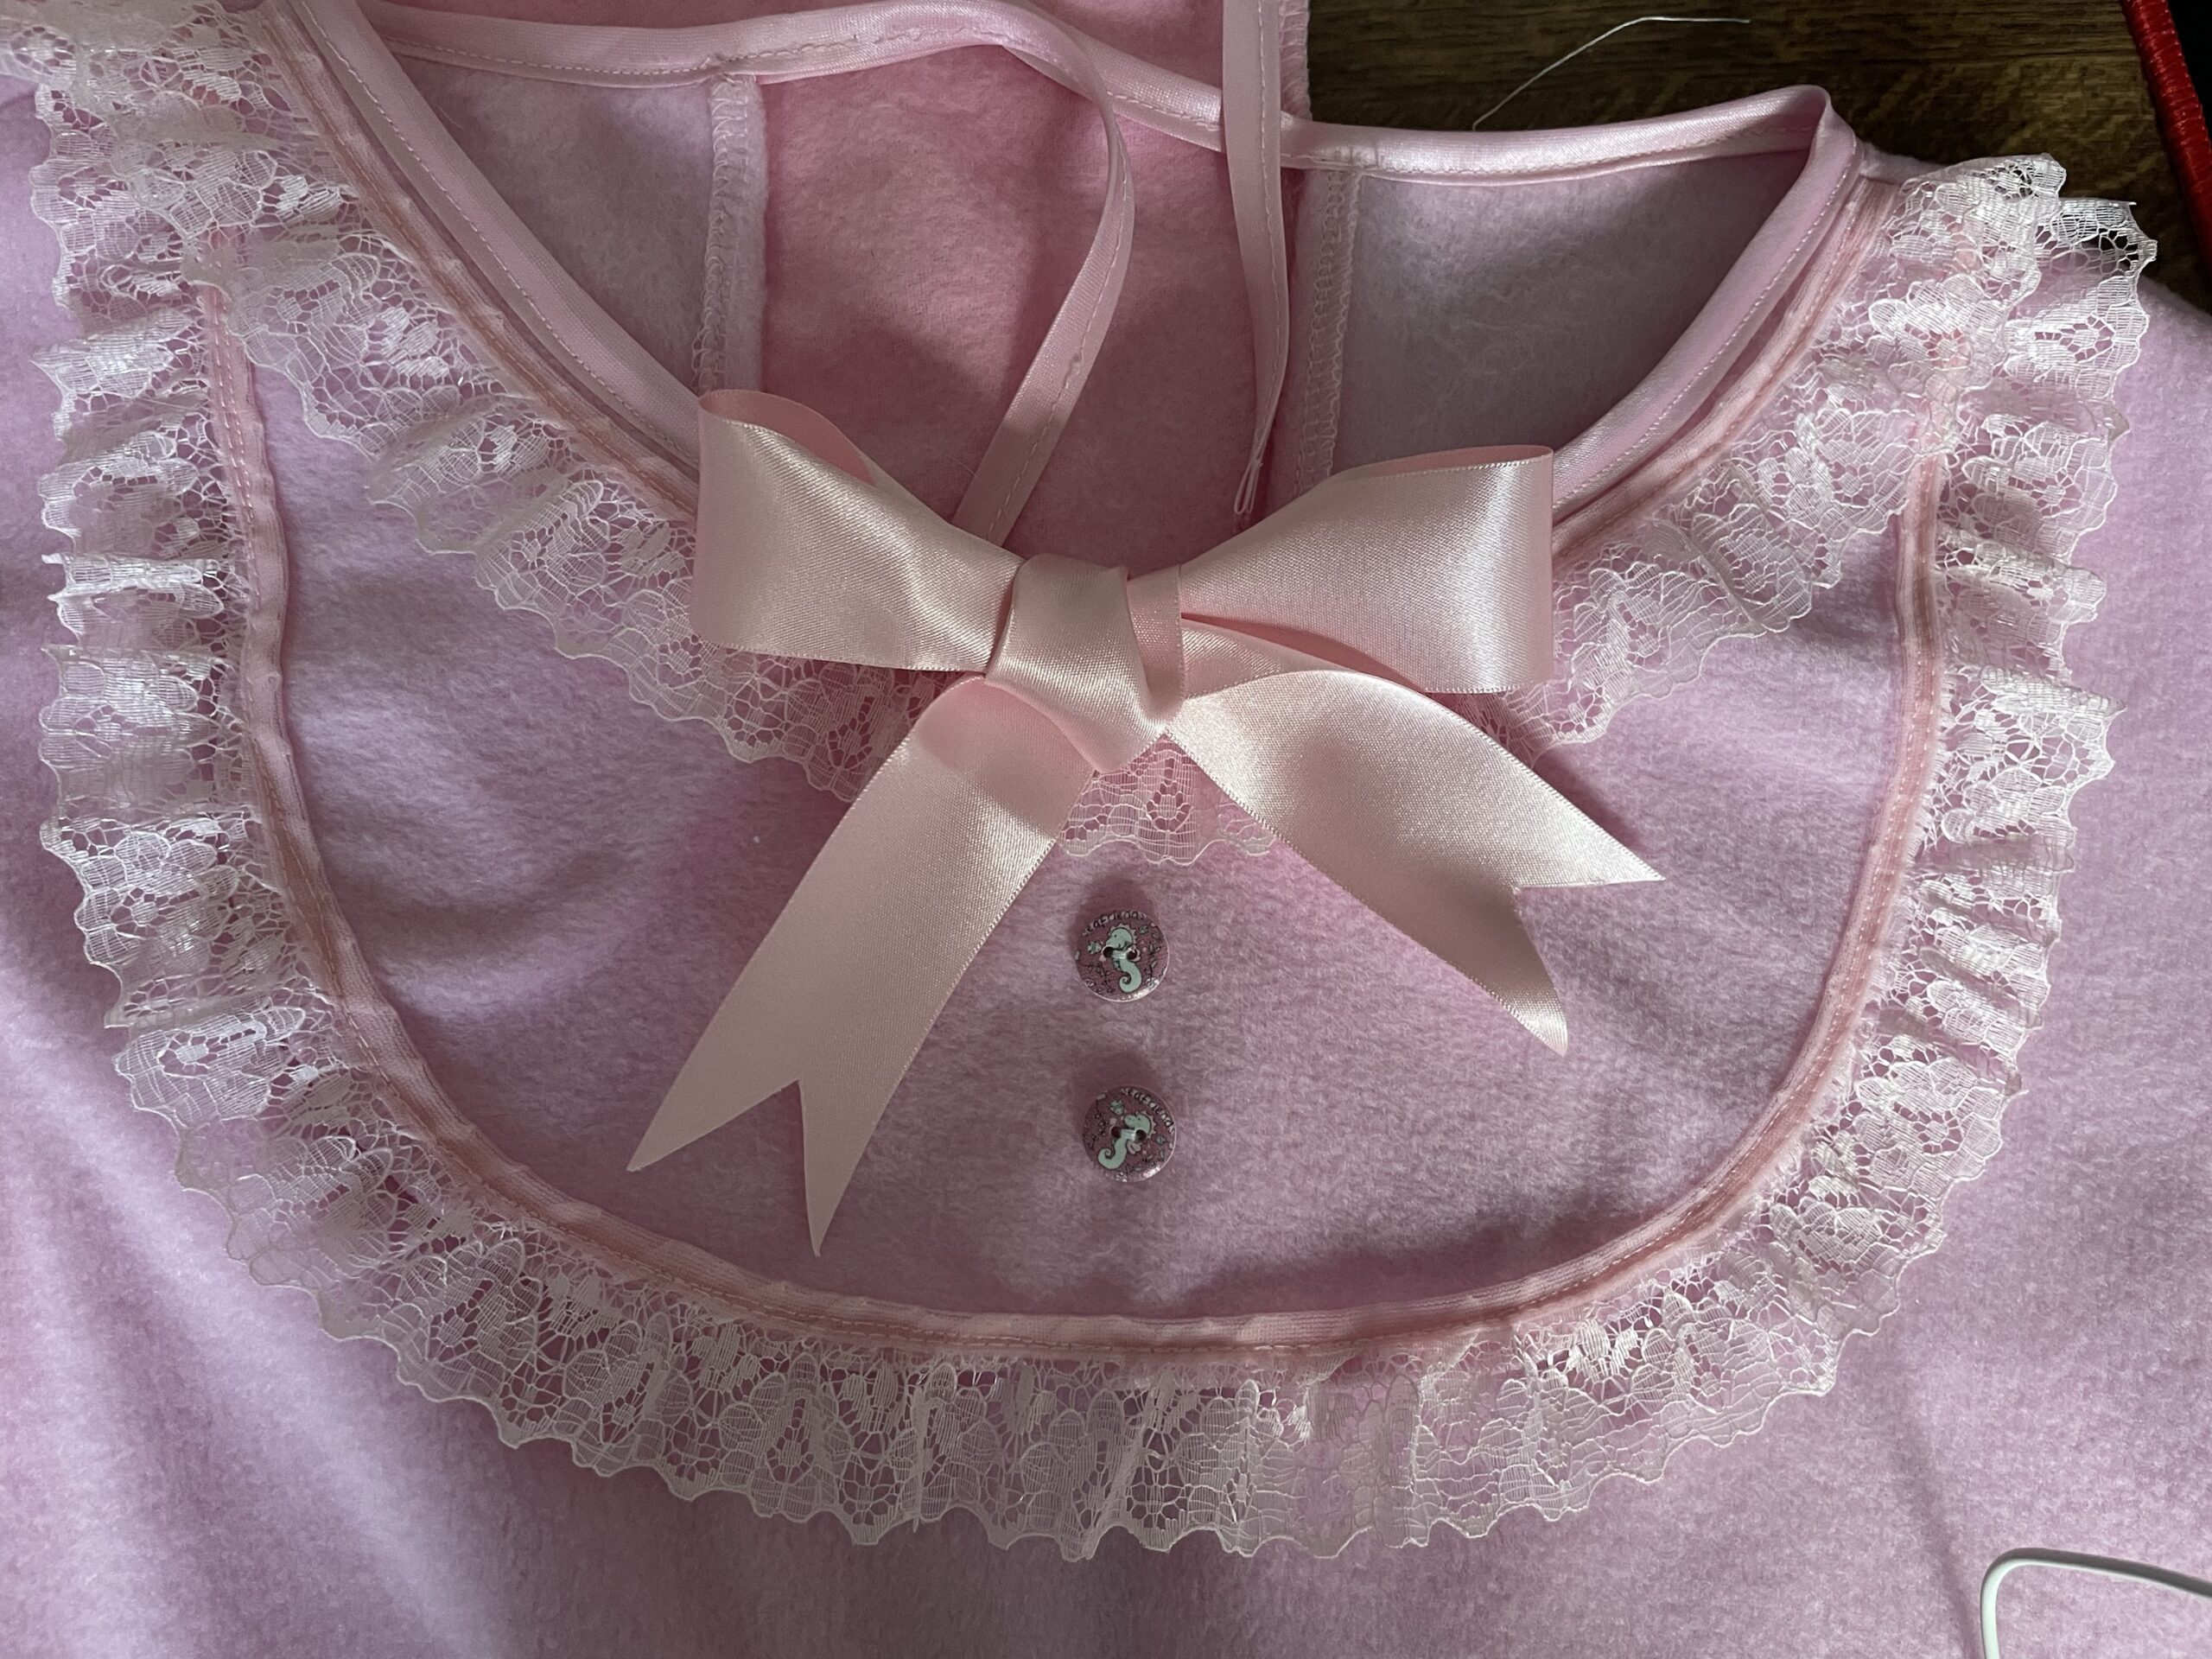 Adultbaby Fleece Sleepsuit with matching lace and ribbon detail ...